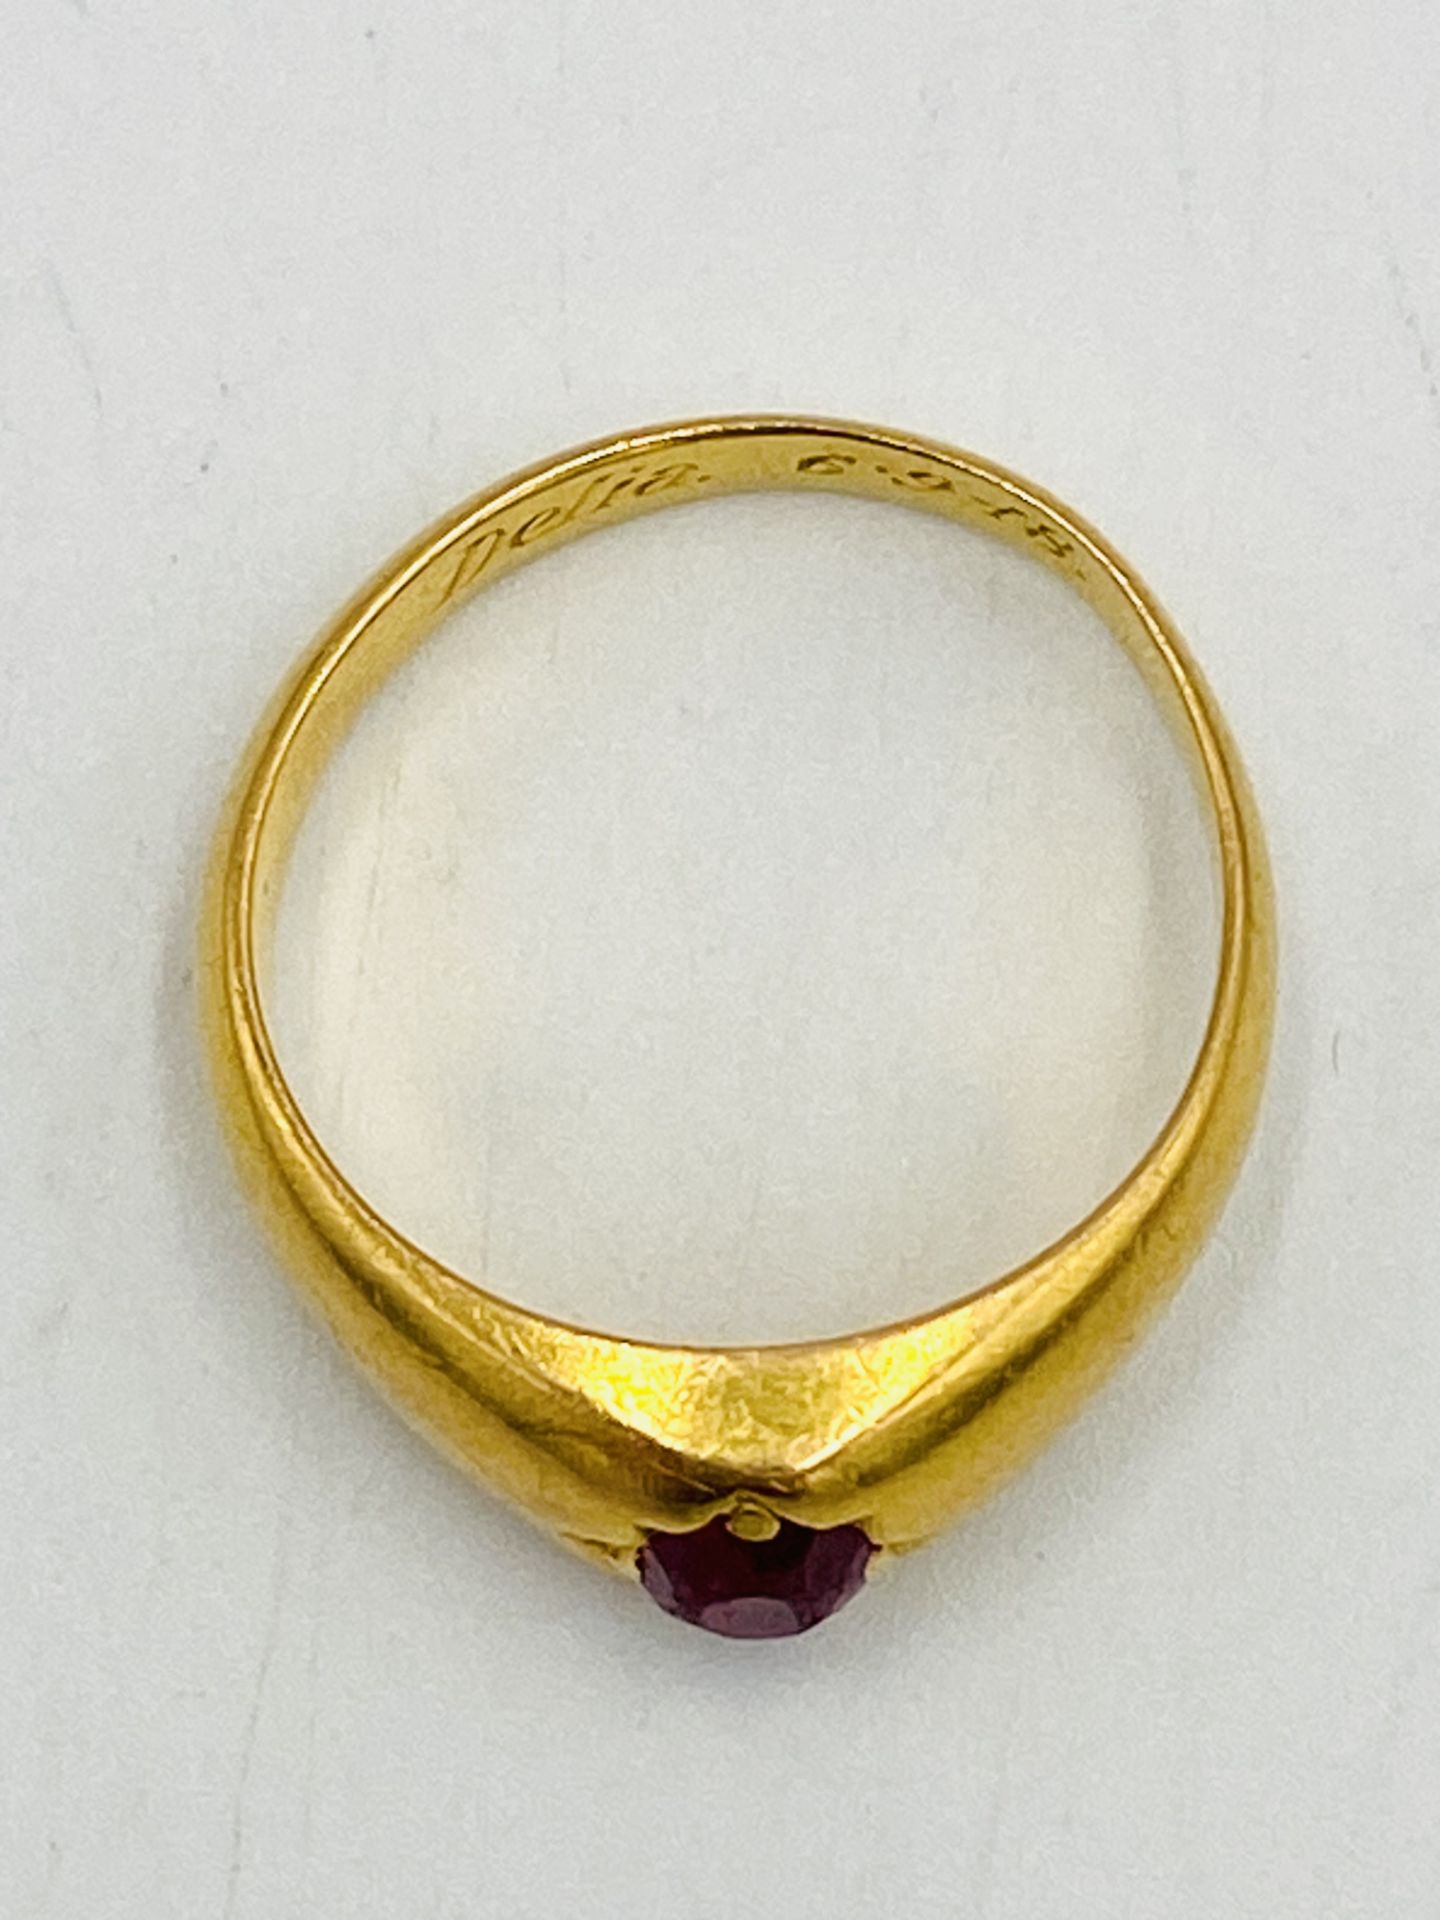 22ct gold ring set with a ruby - Image 2 of 4